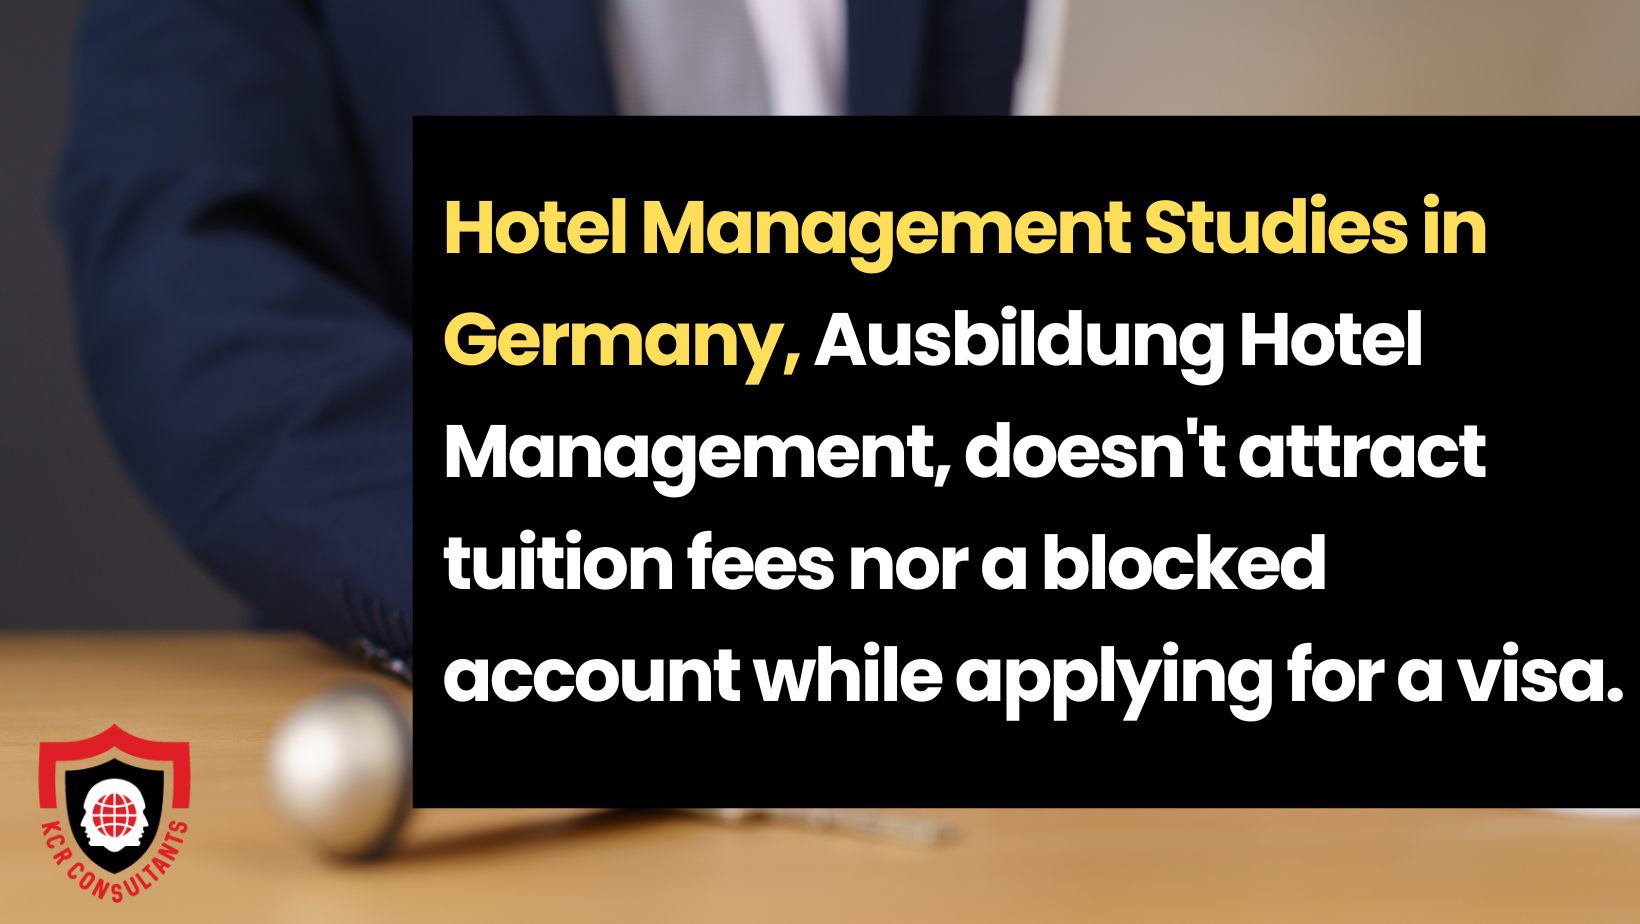 What after the hotel management studies in Germany